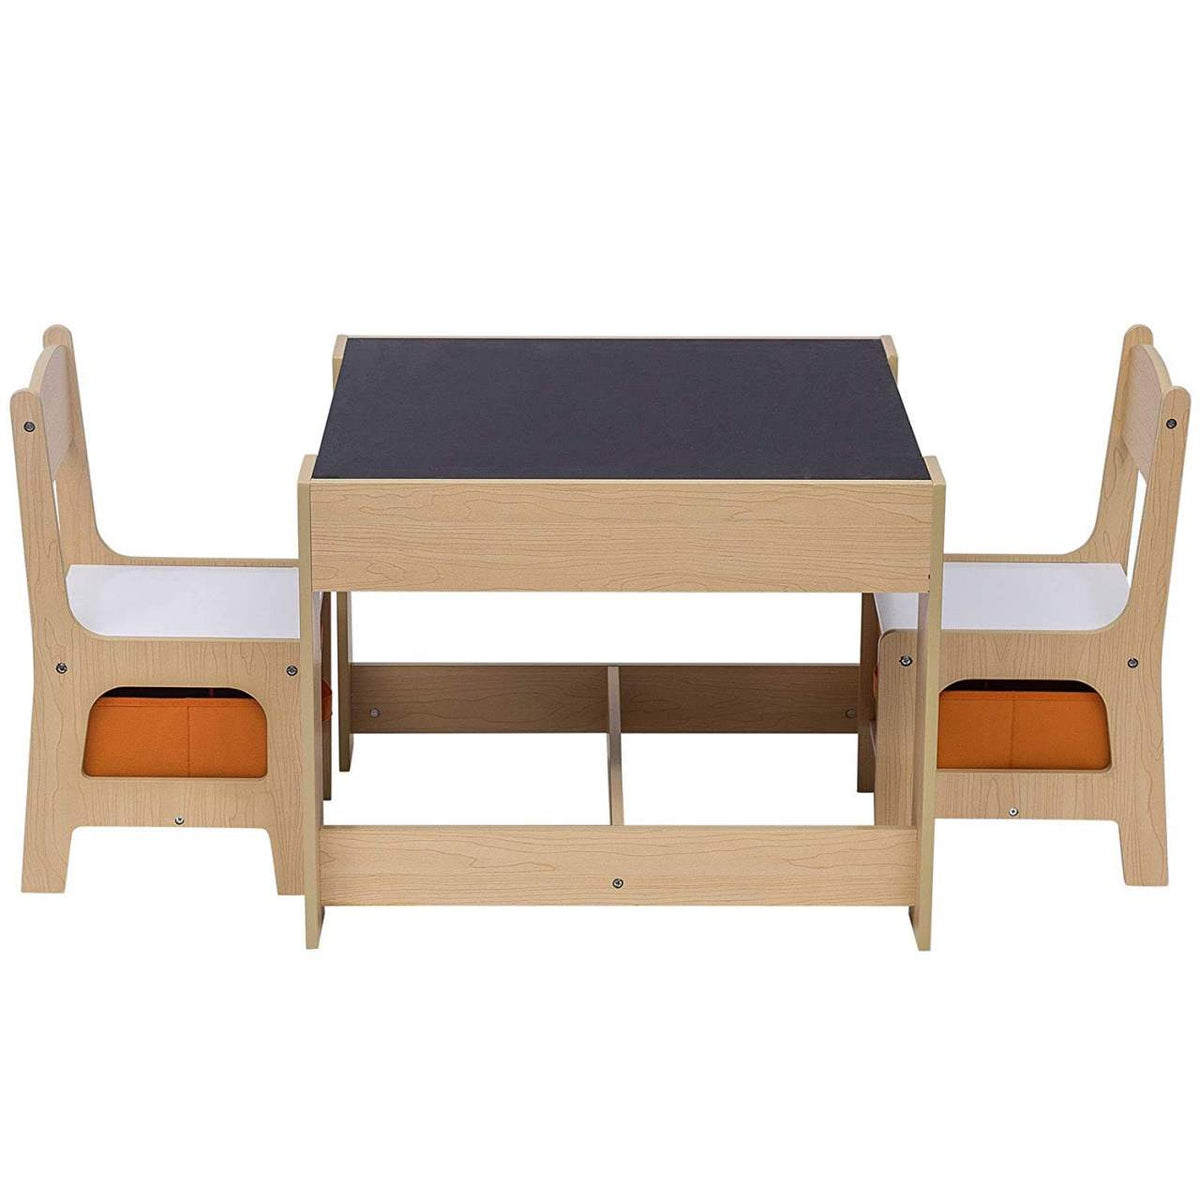 Kid's 3-in-1 White Wooden Table & 2 Chairs with Lego Board and Storage –  www.littlehelper.co.uk